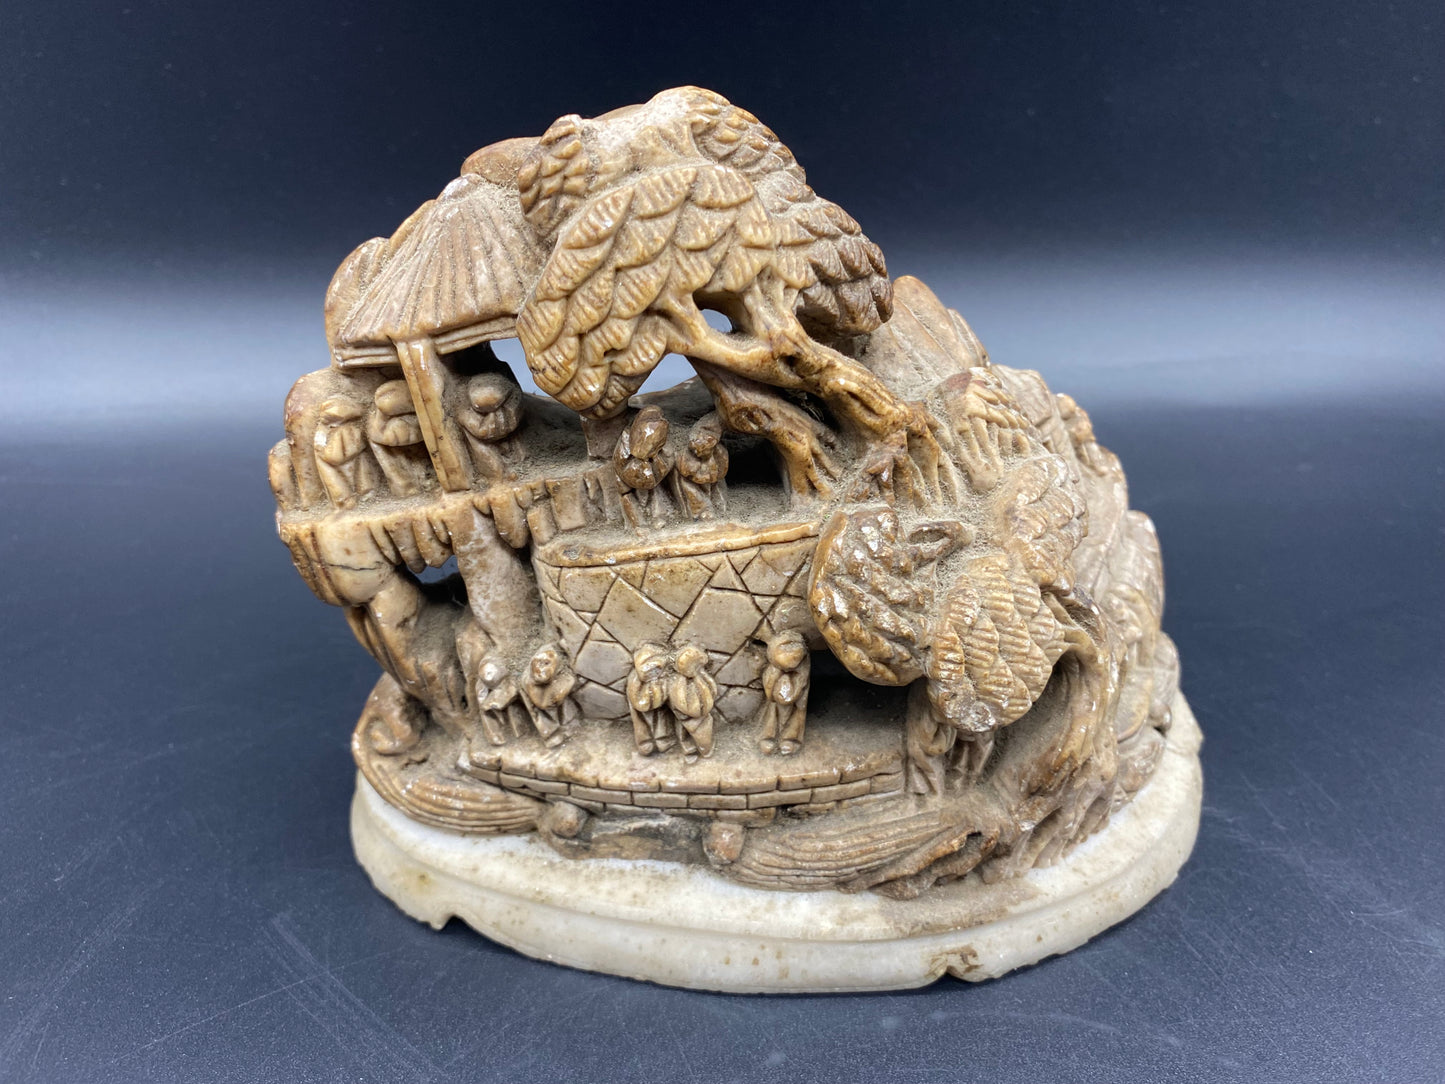 Chinese Soap Stone Carving 19th Century